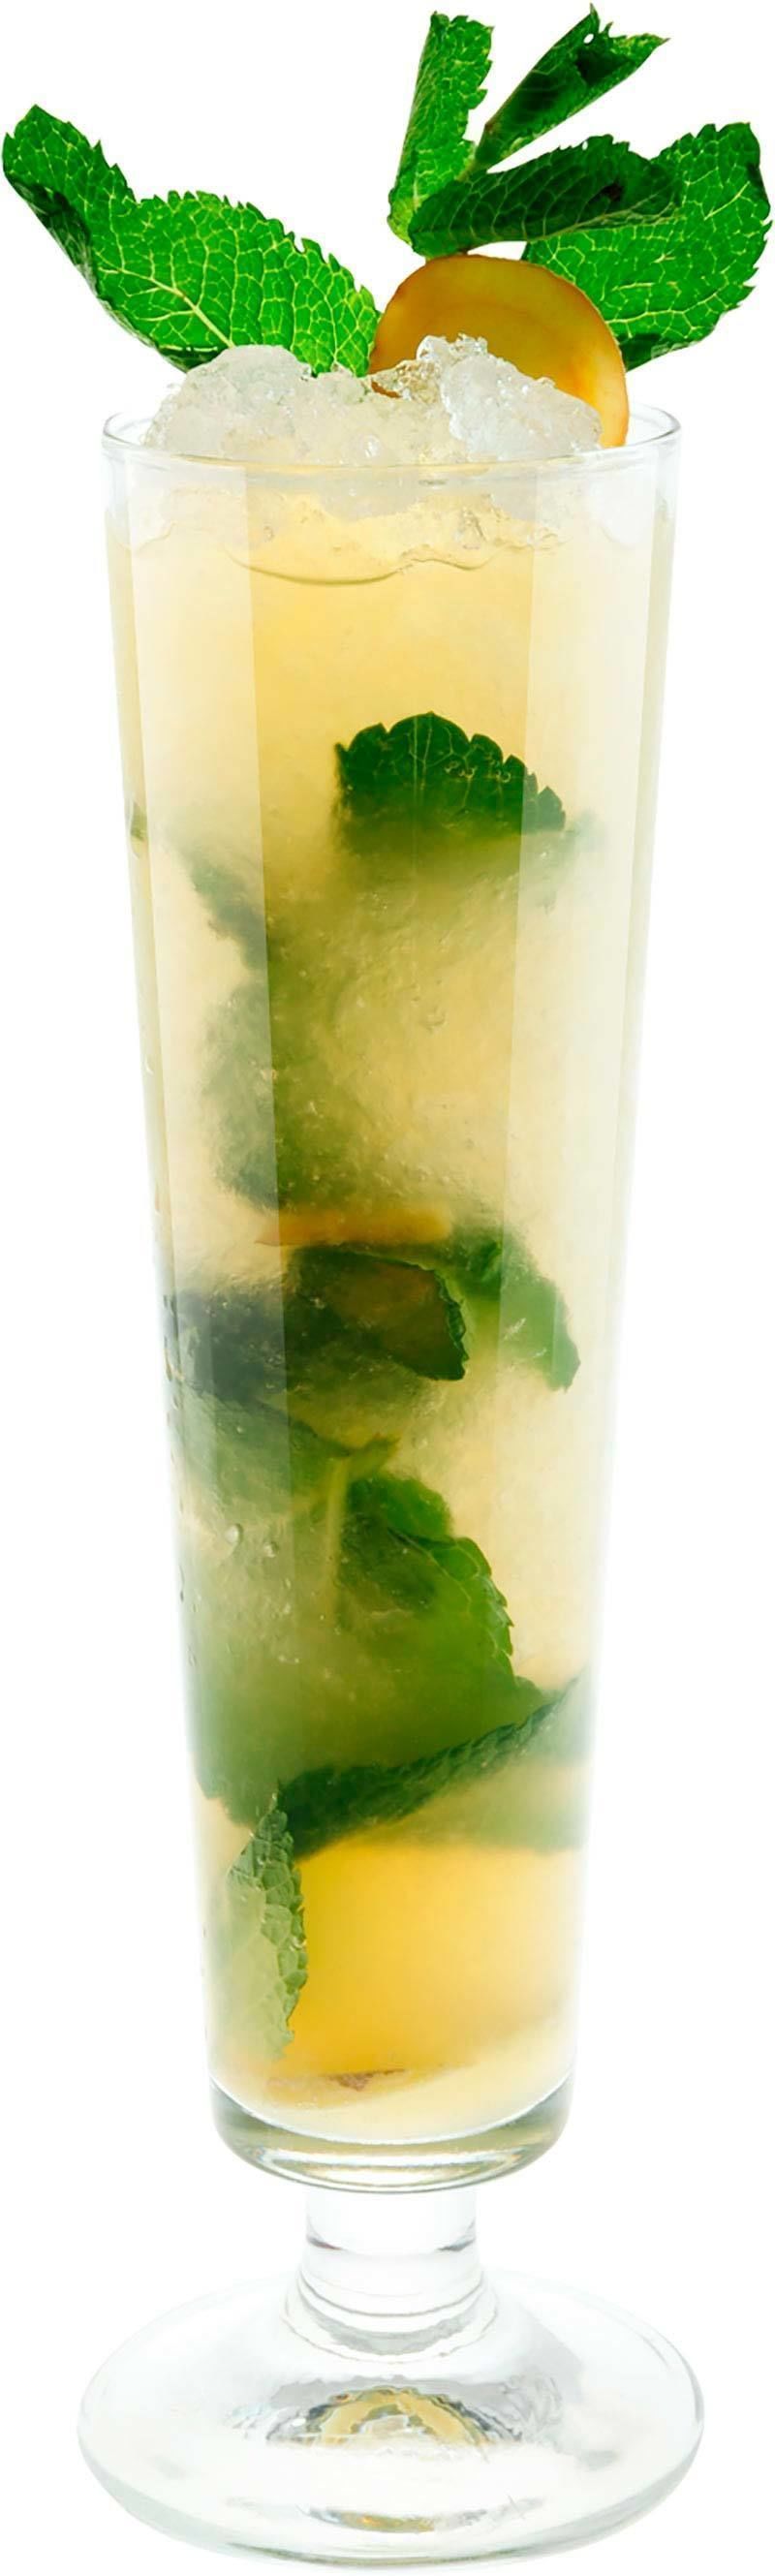 How to Make the Ginger Mojito